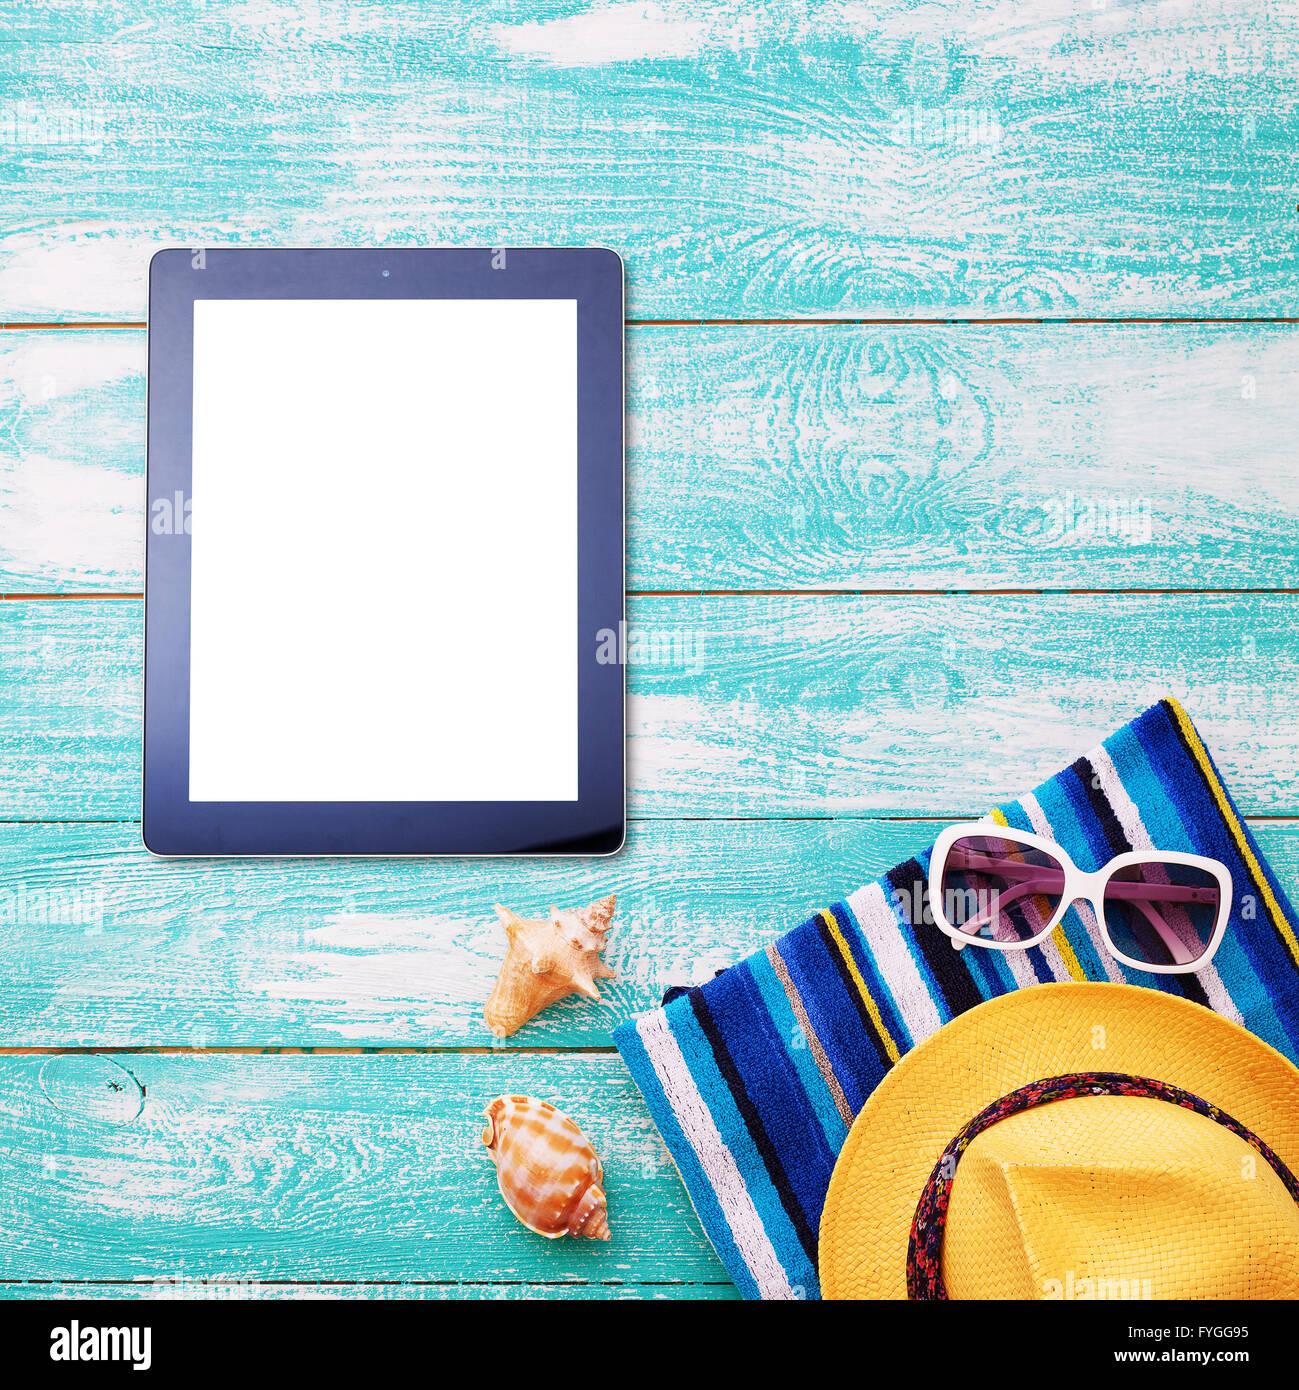 Summer Beach Set Of Summer Accessories And Tablet On Wooden Desk